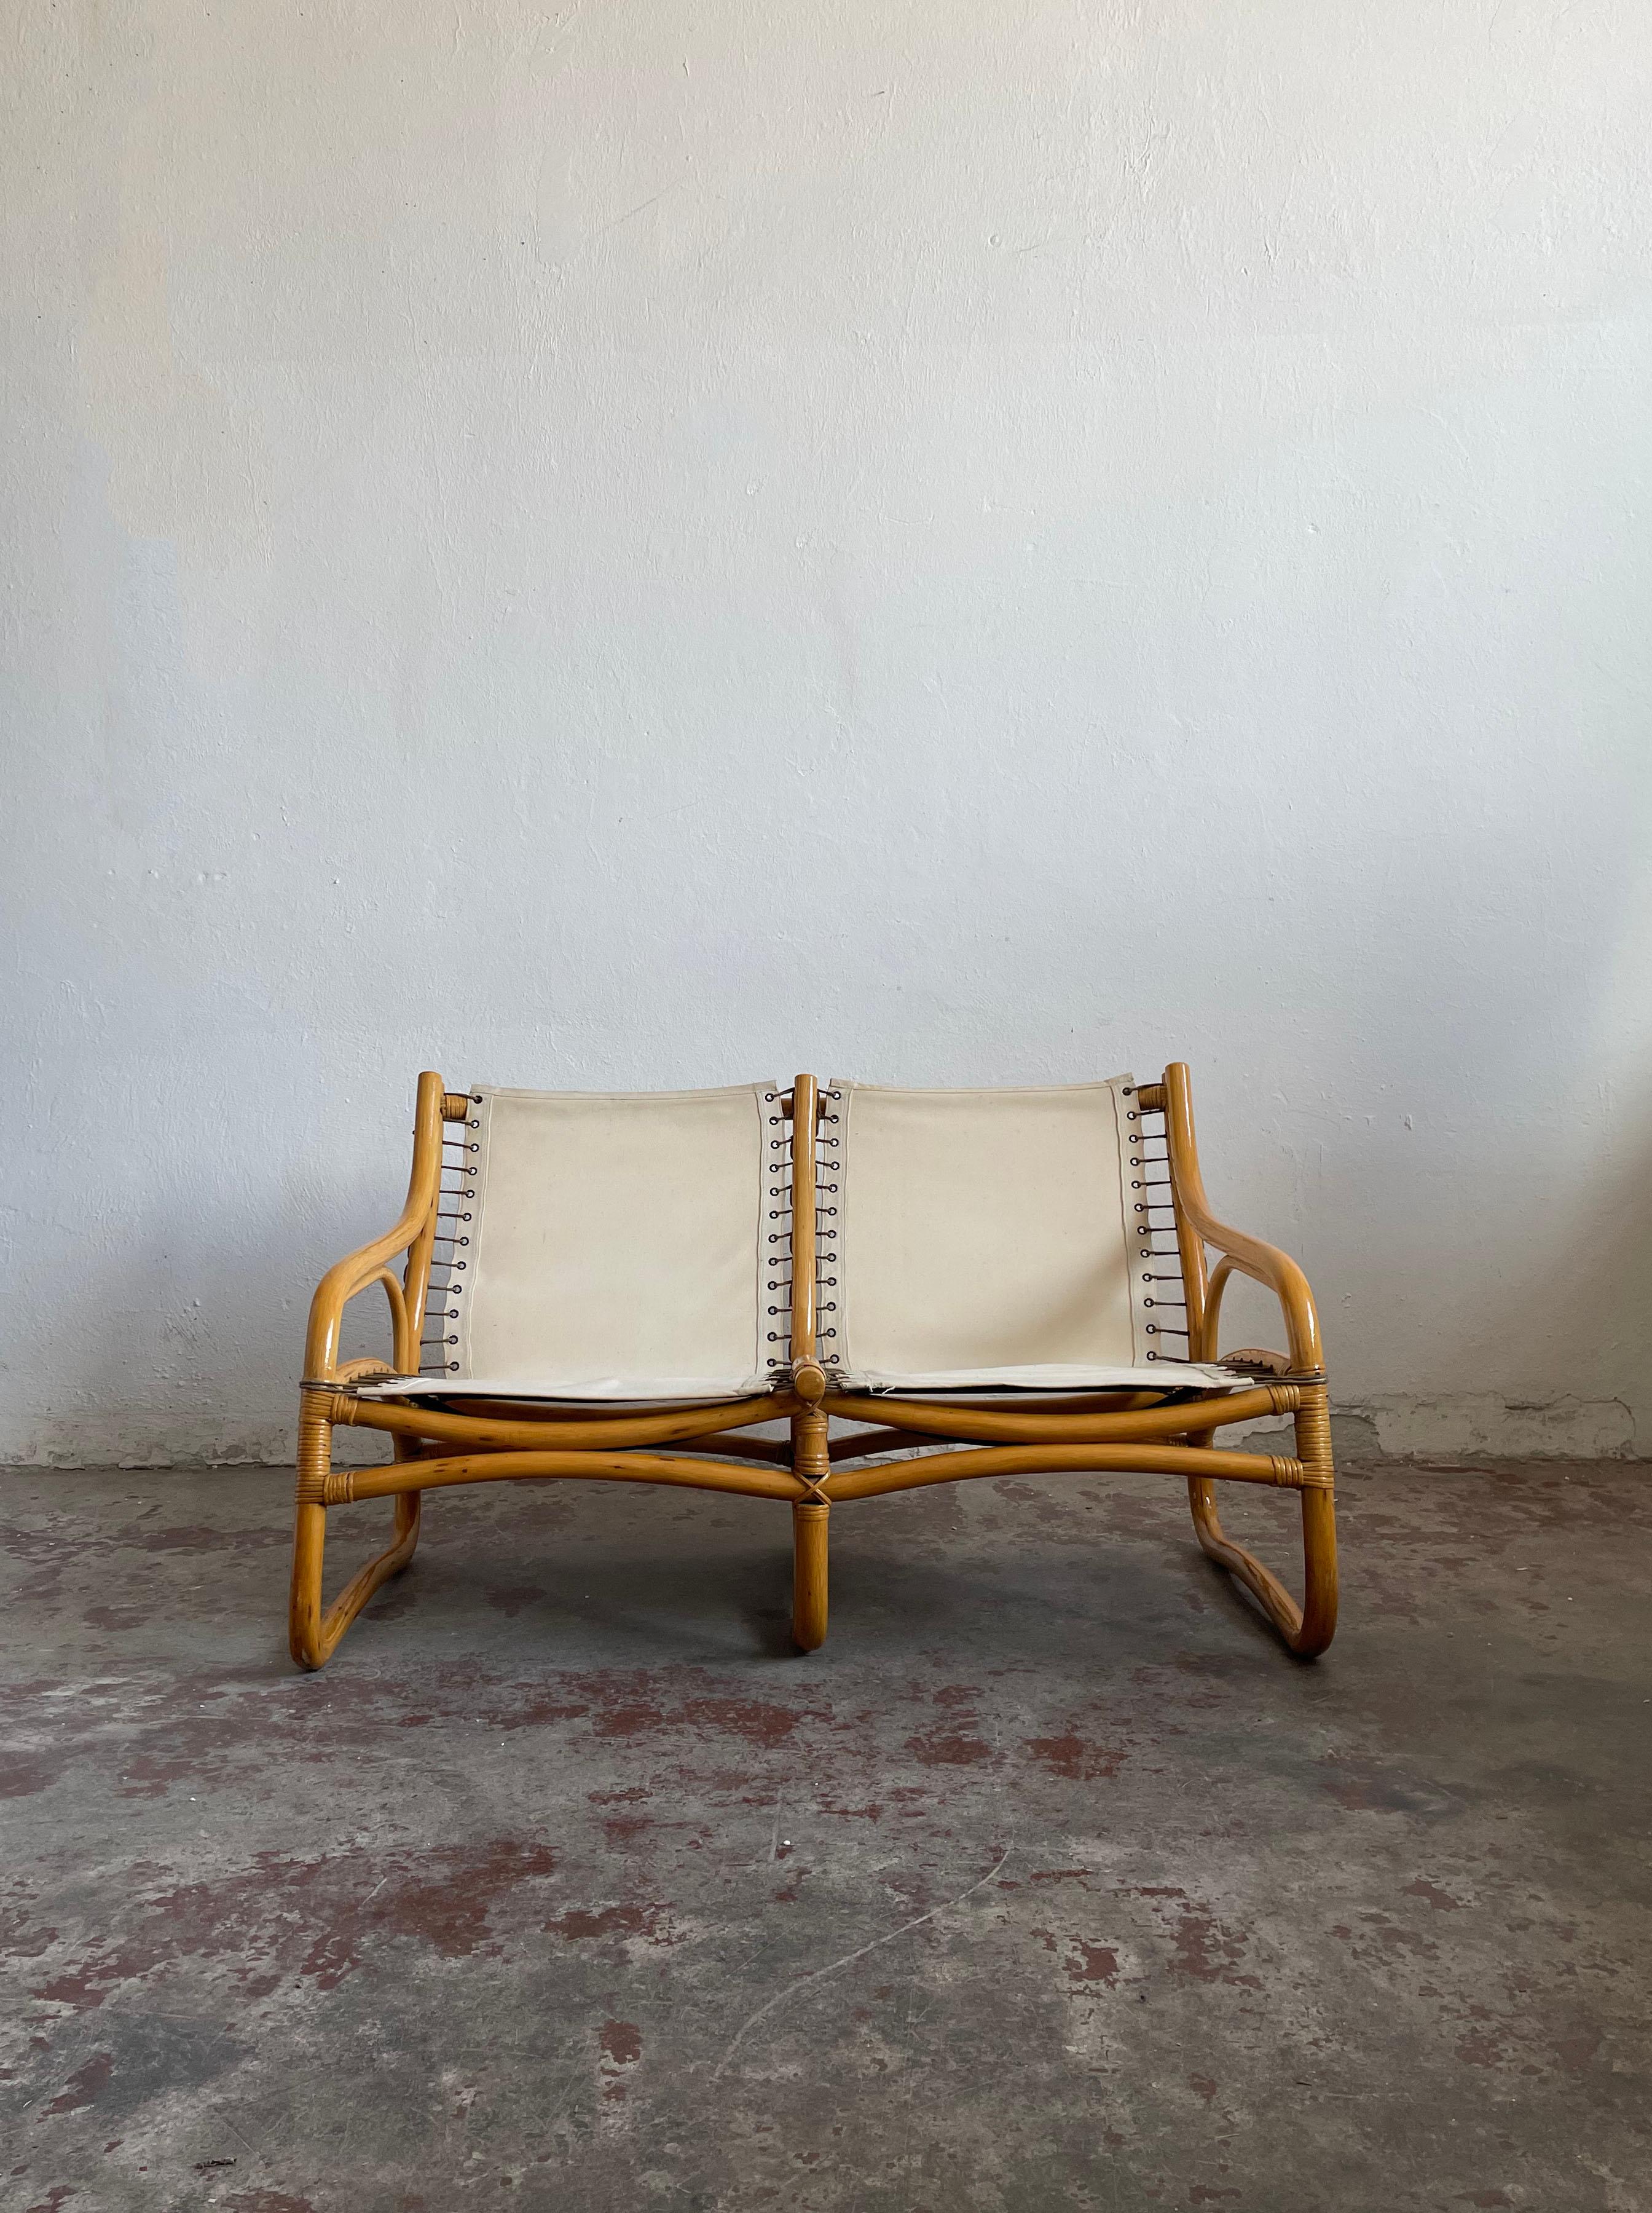 Vintage bamboo 2-seater sofa from the 1970s.

Produced in Scandinavia by an unknown manufacturer. The quality of the production is very high.

The sofa features a bamboo frame with durable fabric strapping and a high-quality light blue (turquoise)